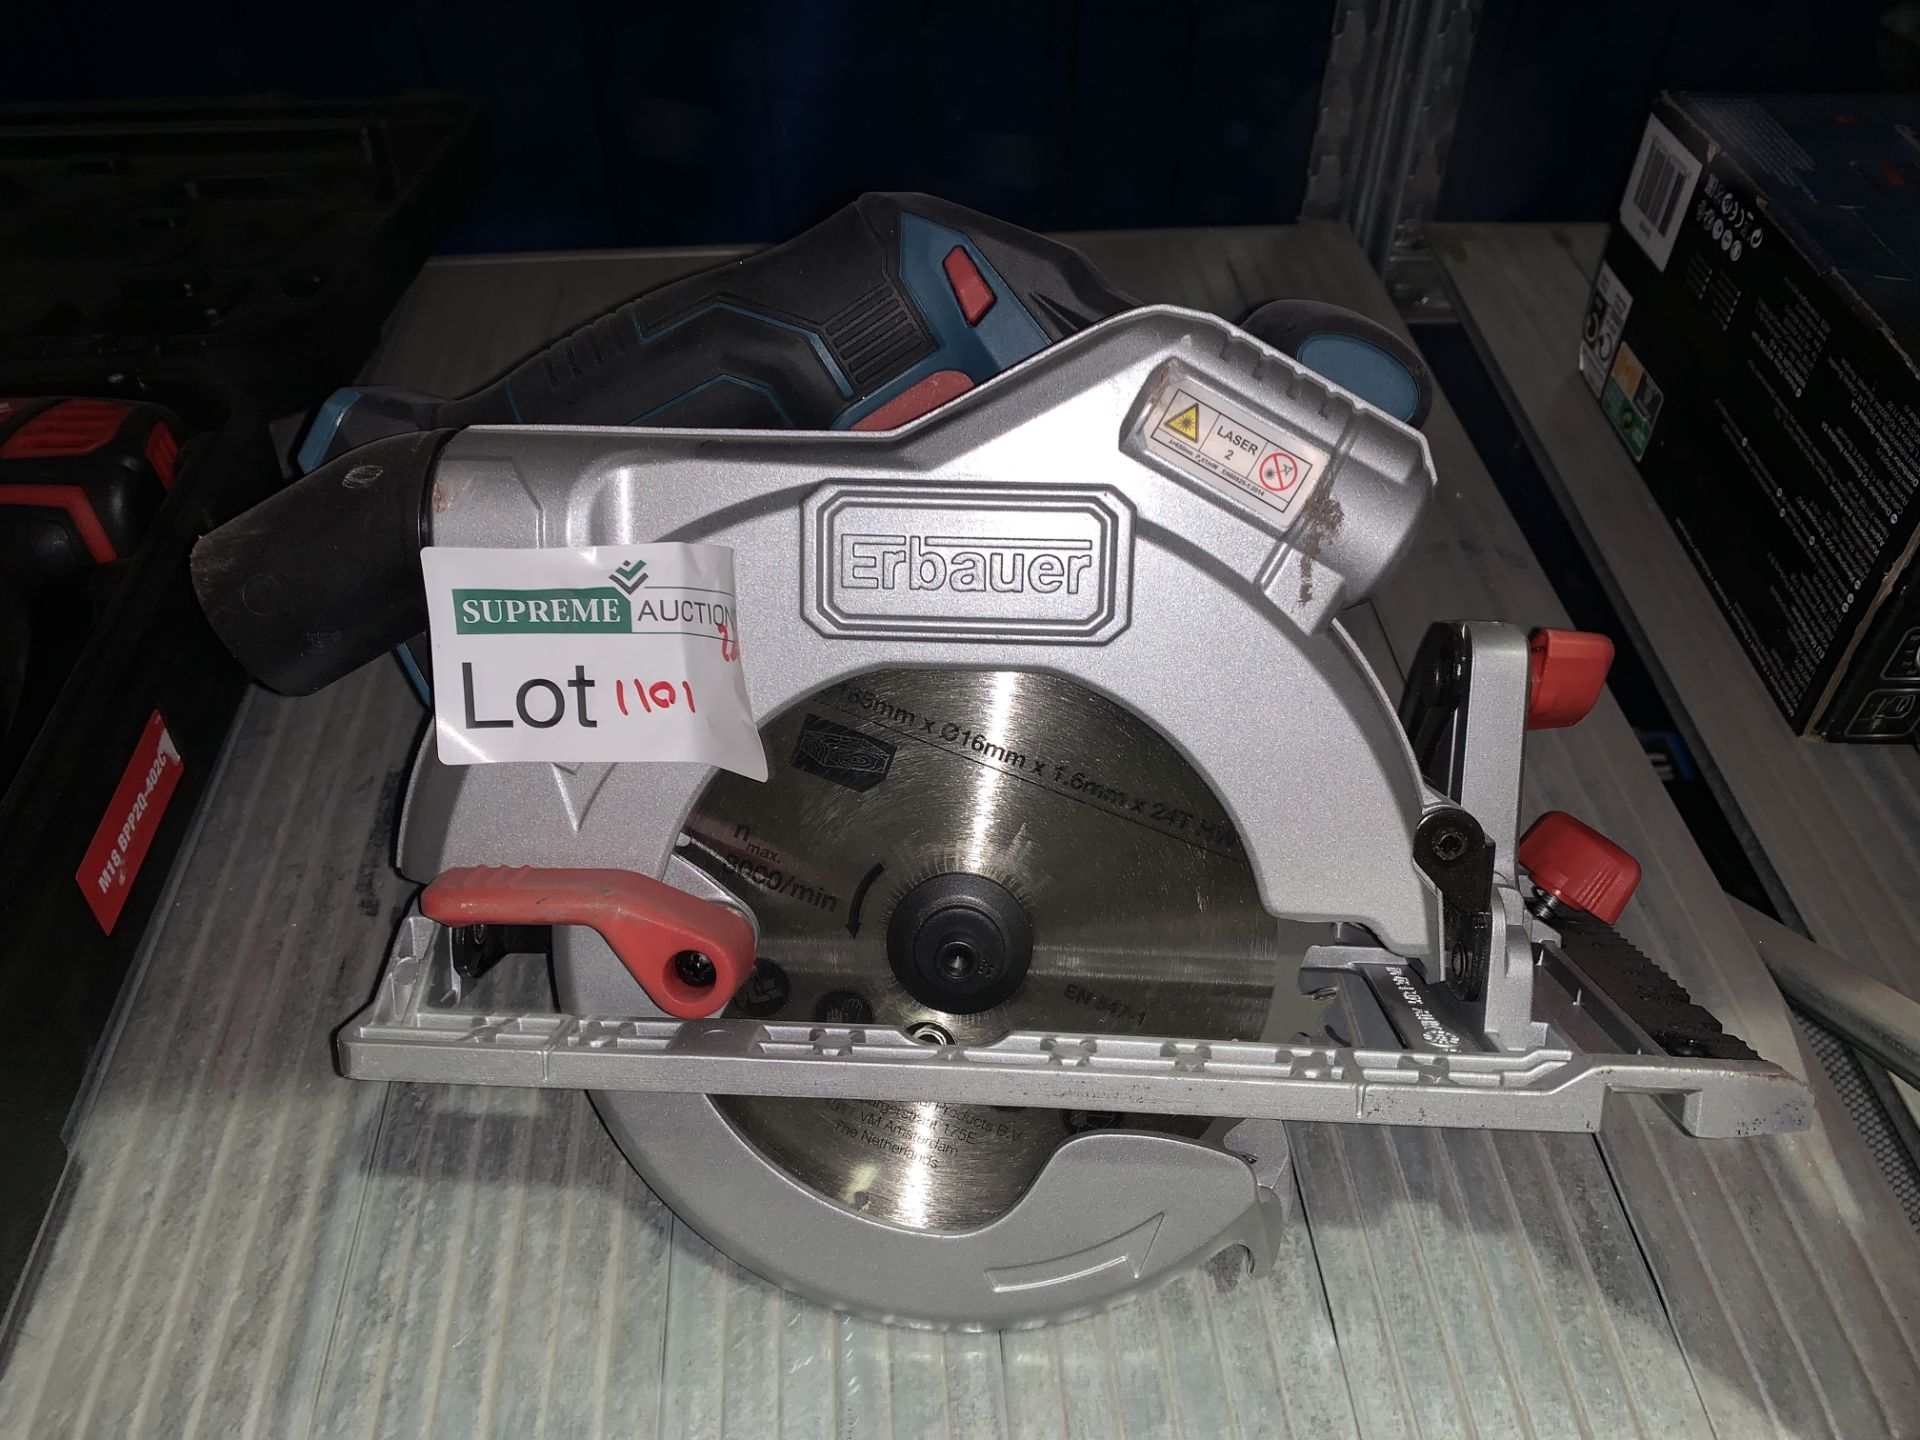 ERBAUER CORDLESS BRUSHLESS 18V CIRCULAR SAW (UNCHECKED, UNTESTED)